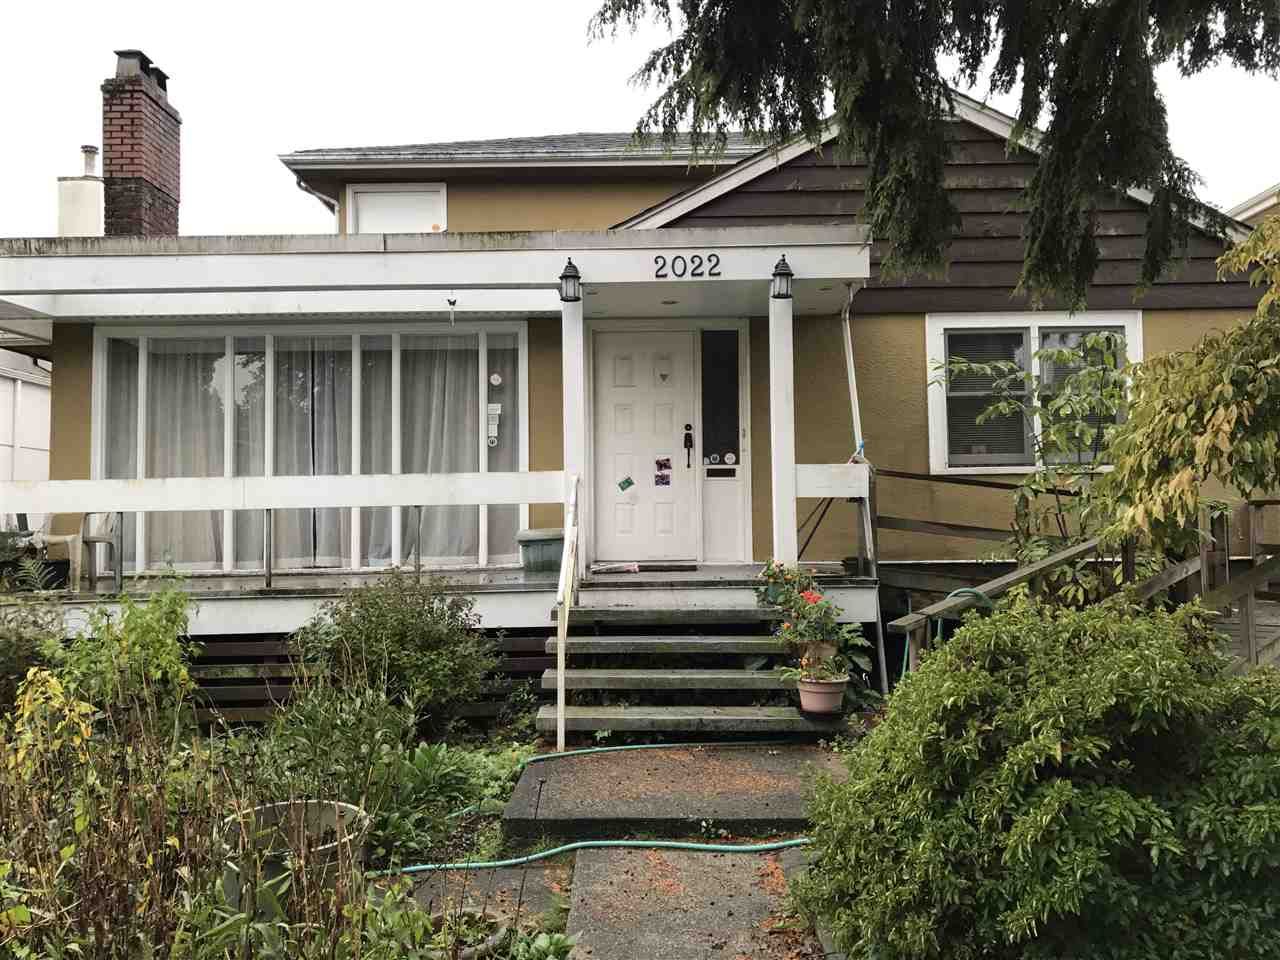 Photo 4: Photos: 2022 W 61ST Avenue in Vancouver: S.W. Marine House for sale (Vancouver West)  : MLS®# R2216054